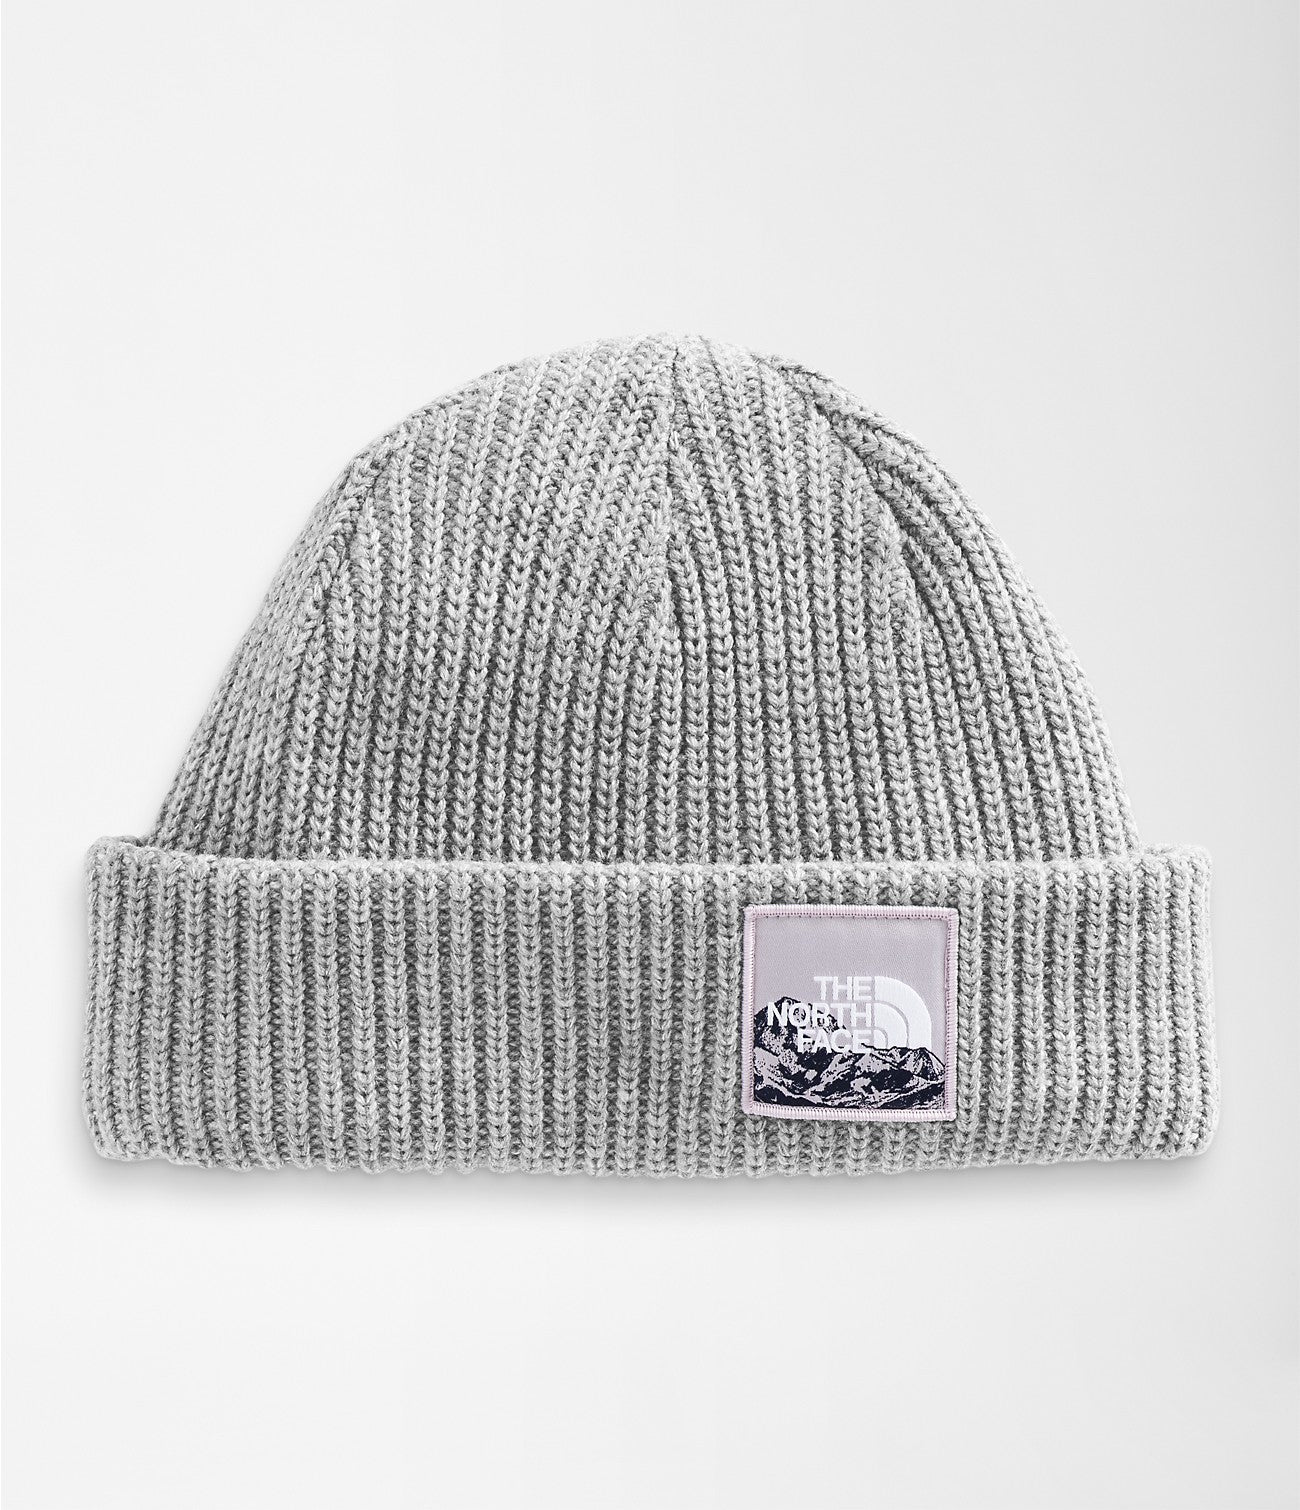 The North Face Salty Dog Beanie Accessories North Face TNF Light Grey Heather/Graphic Patch-92J  